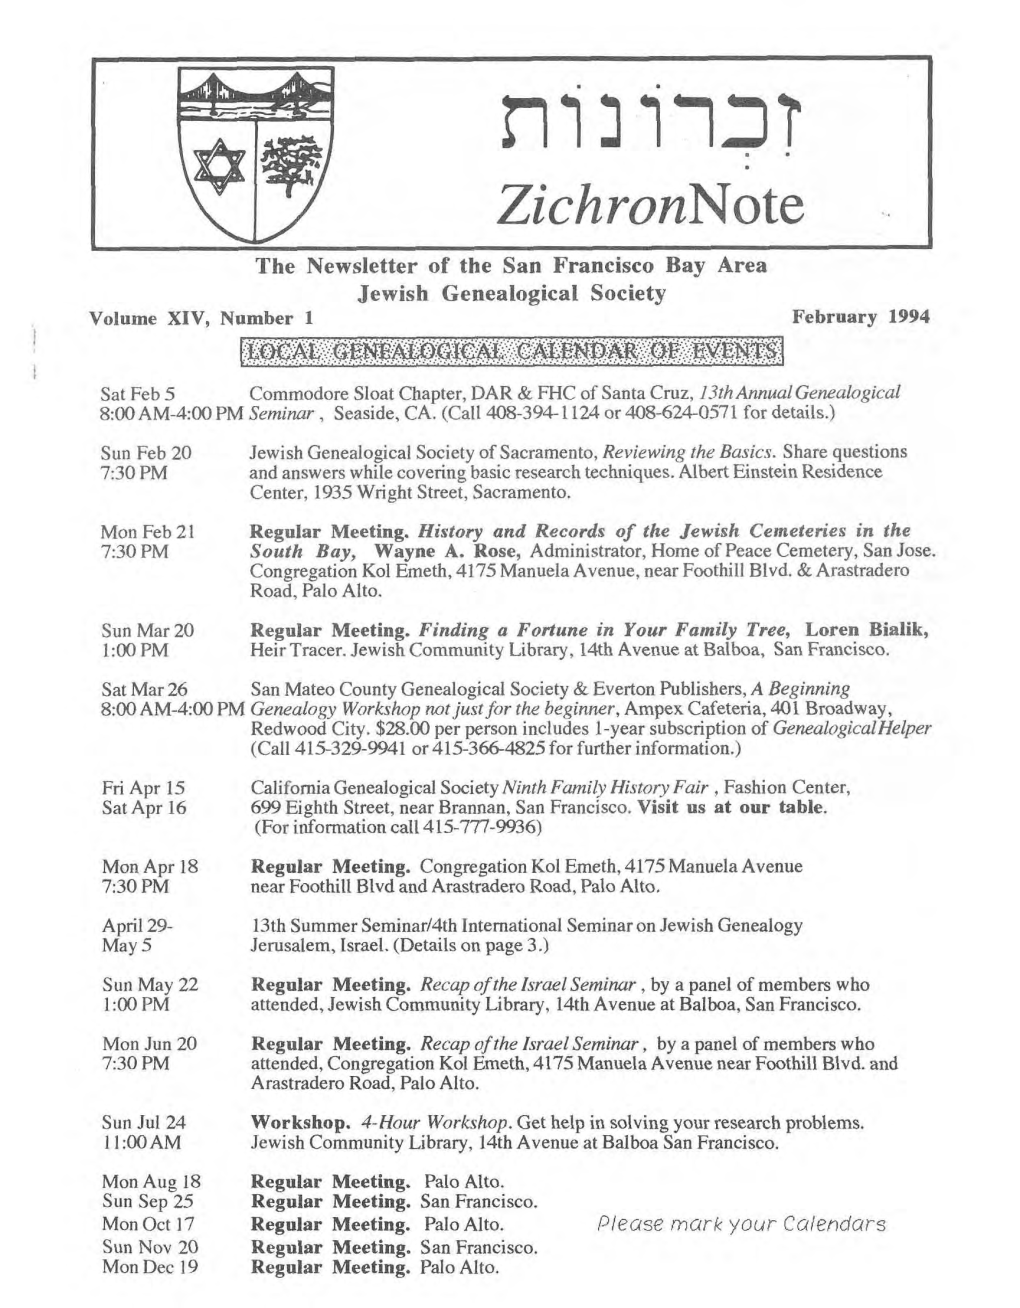 Zichronnote the Newsletter of the San Francisco Bay Area Jewish Genealogical Society Volume XIV, Number 1 Febrnary 1994